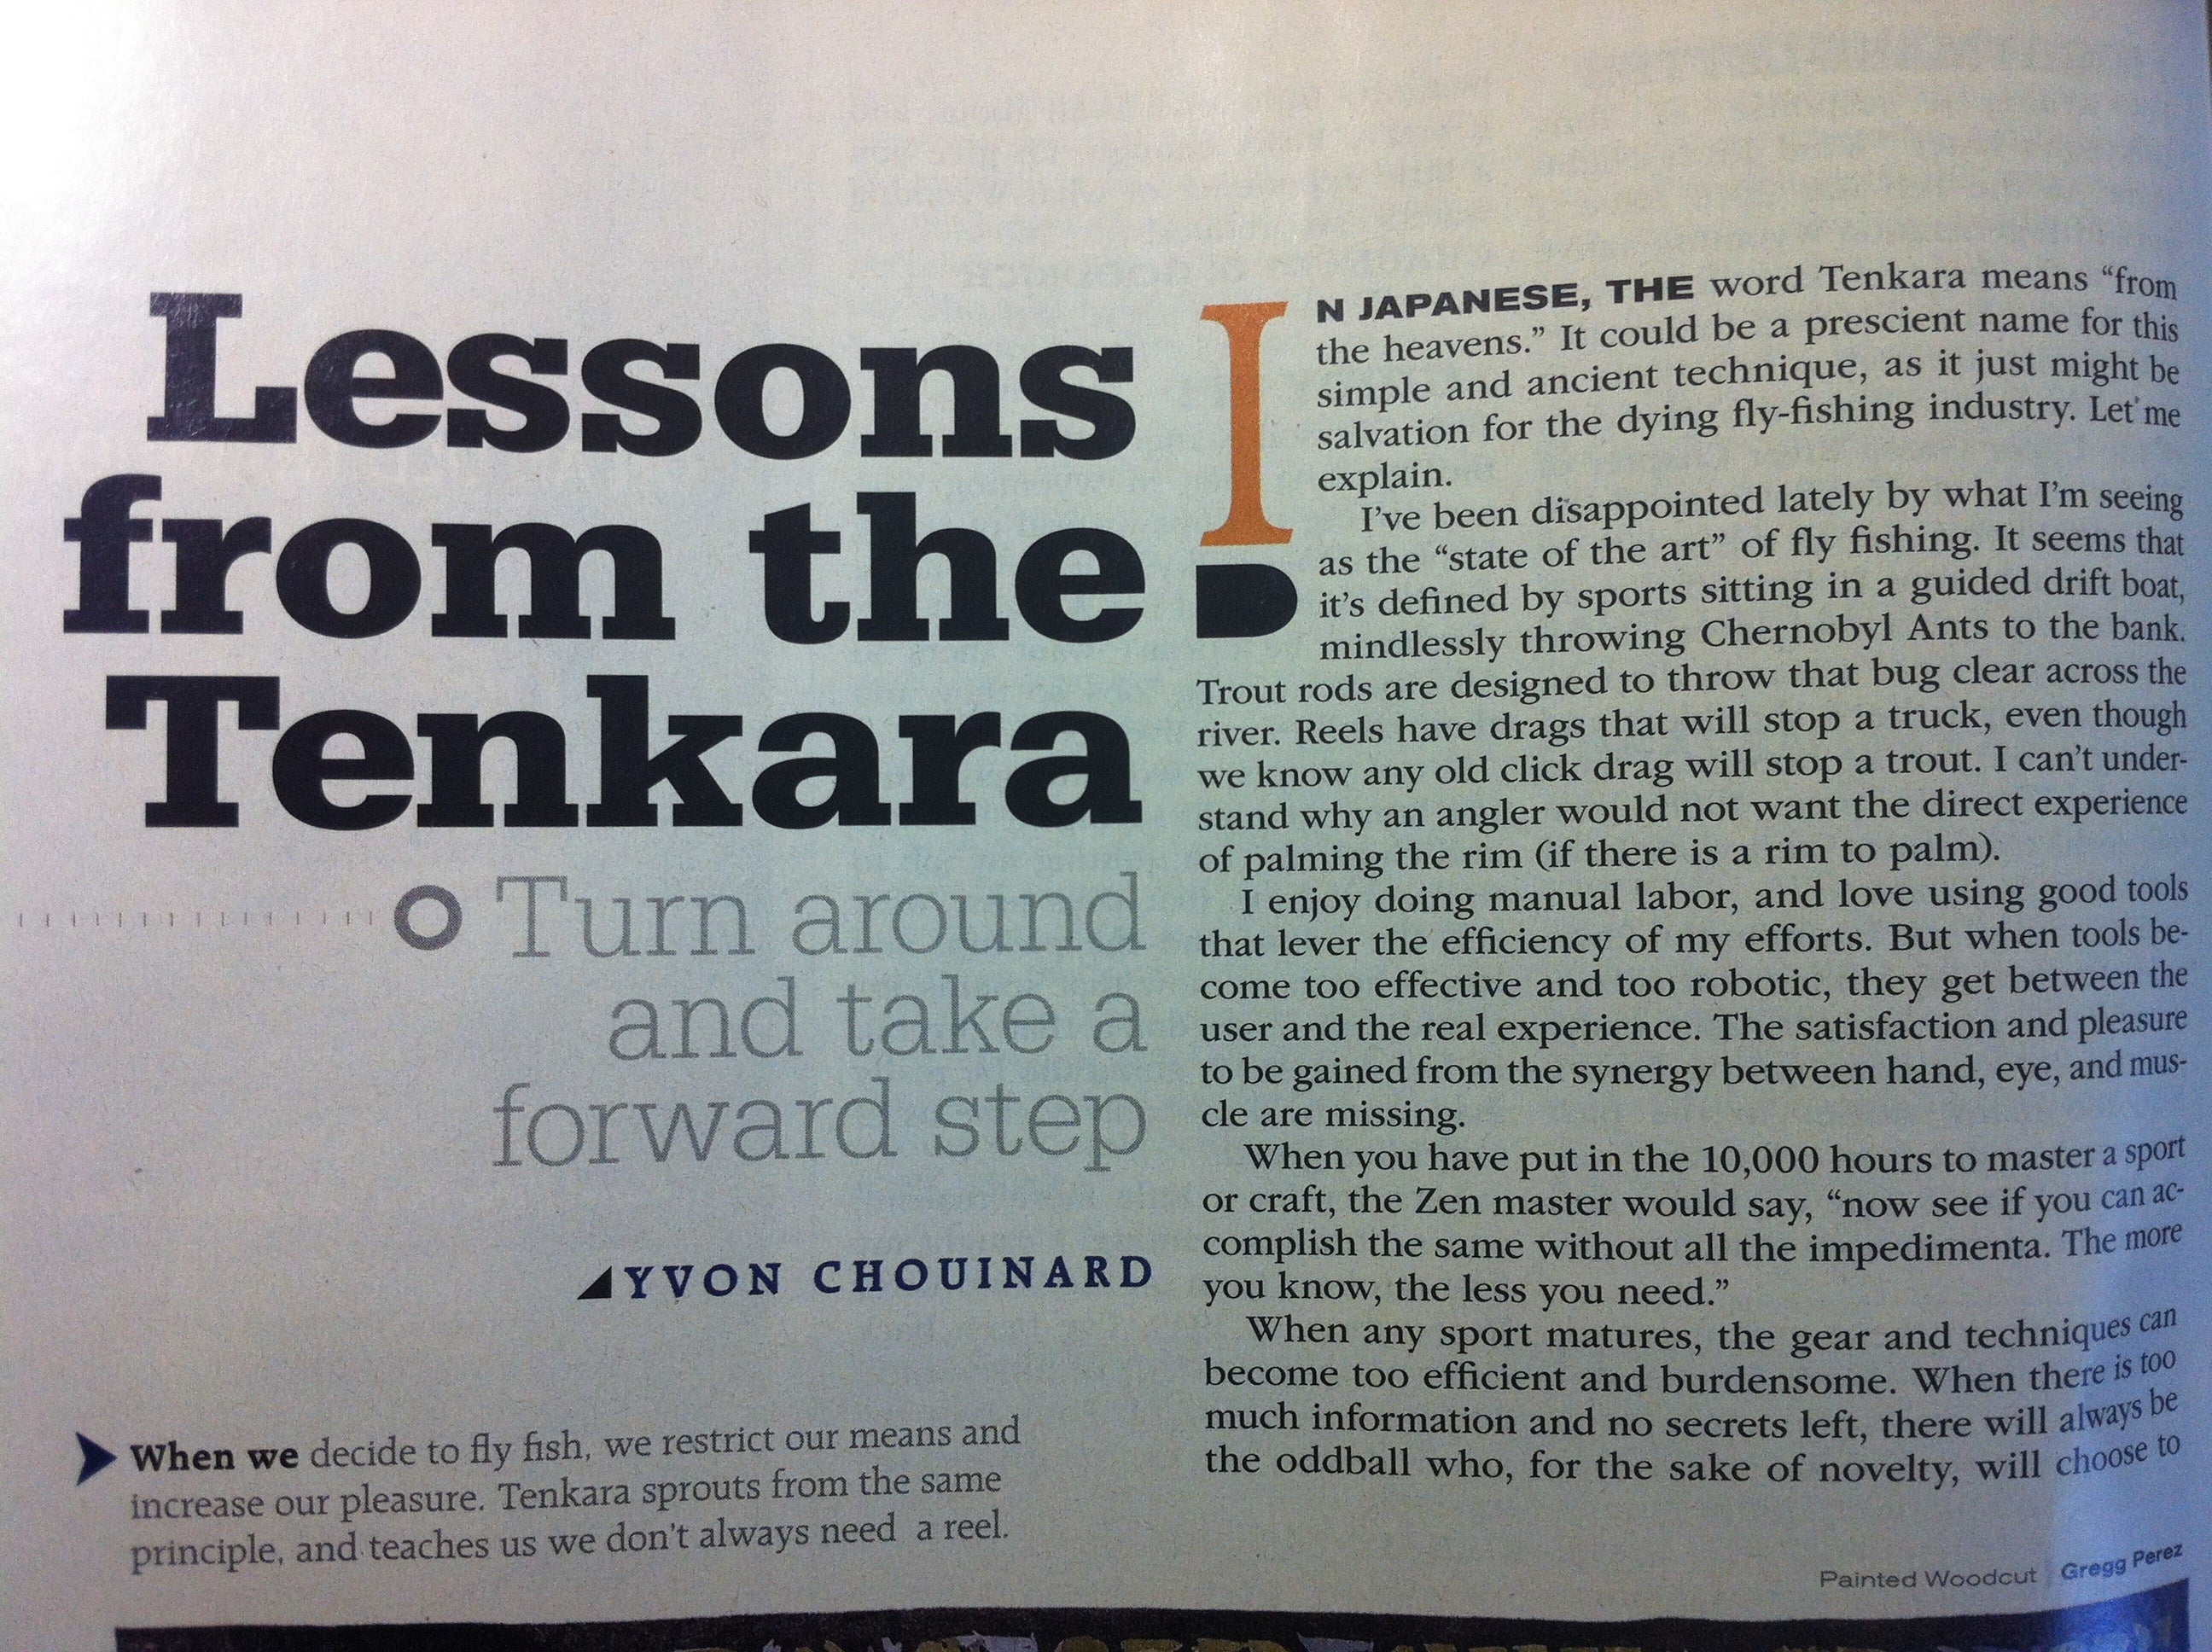 Tenkara featured in current Fly Fisherman magazine Article by Yvon Chouinard